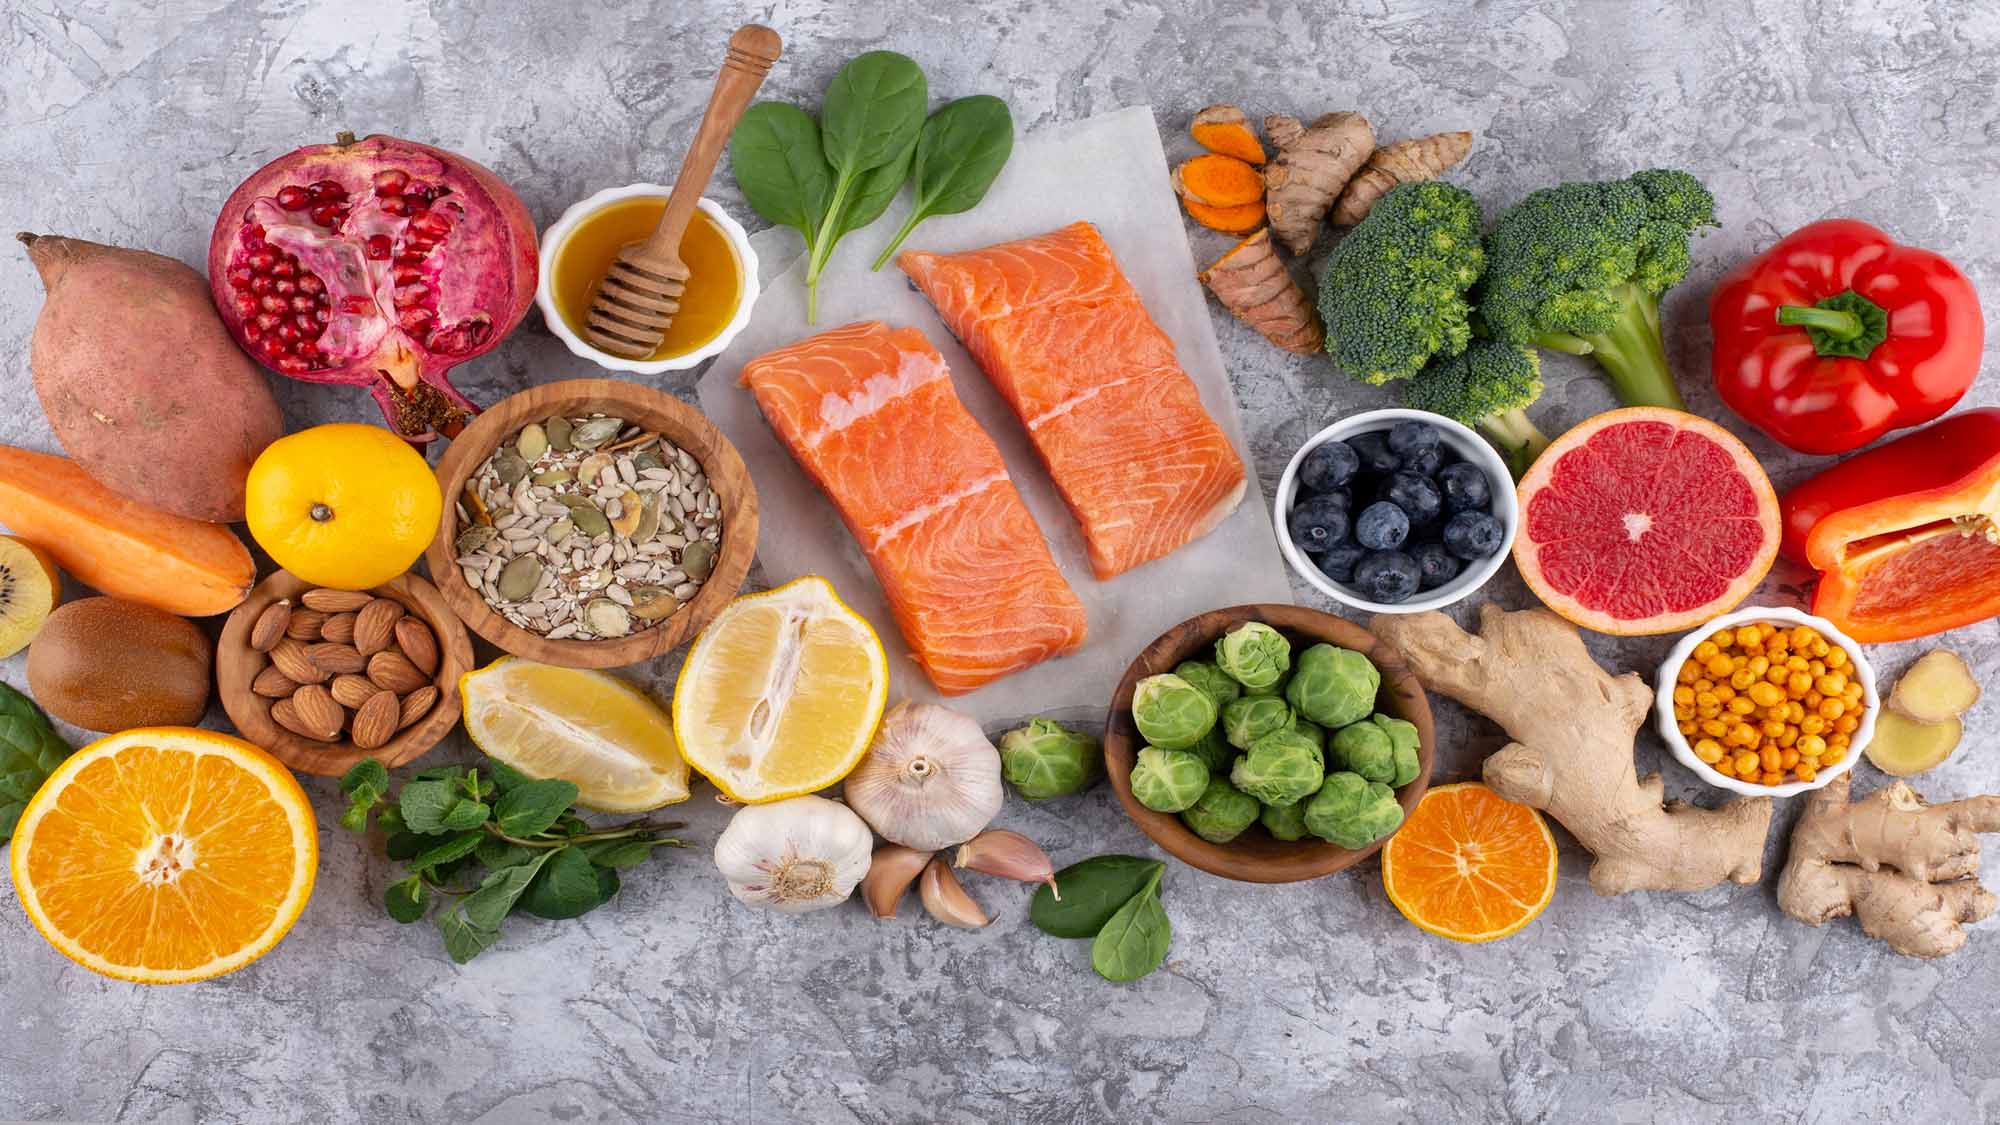 assorted-superfoods-salmon-blueberries-broccoli-and-more